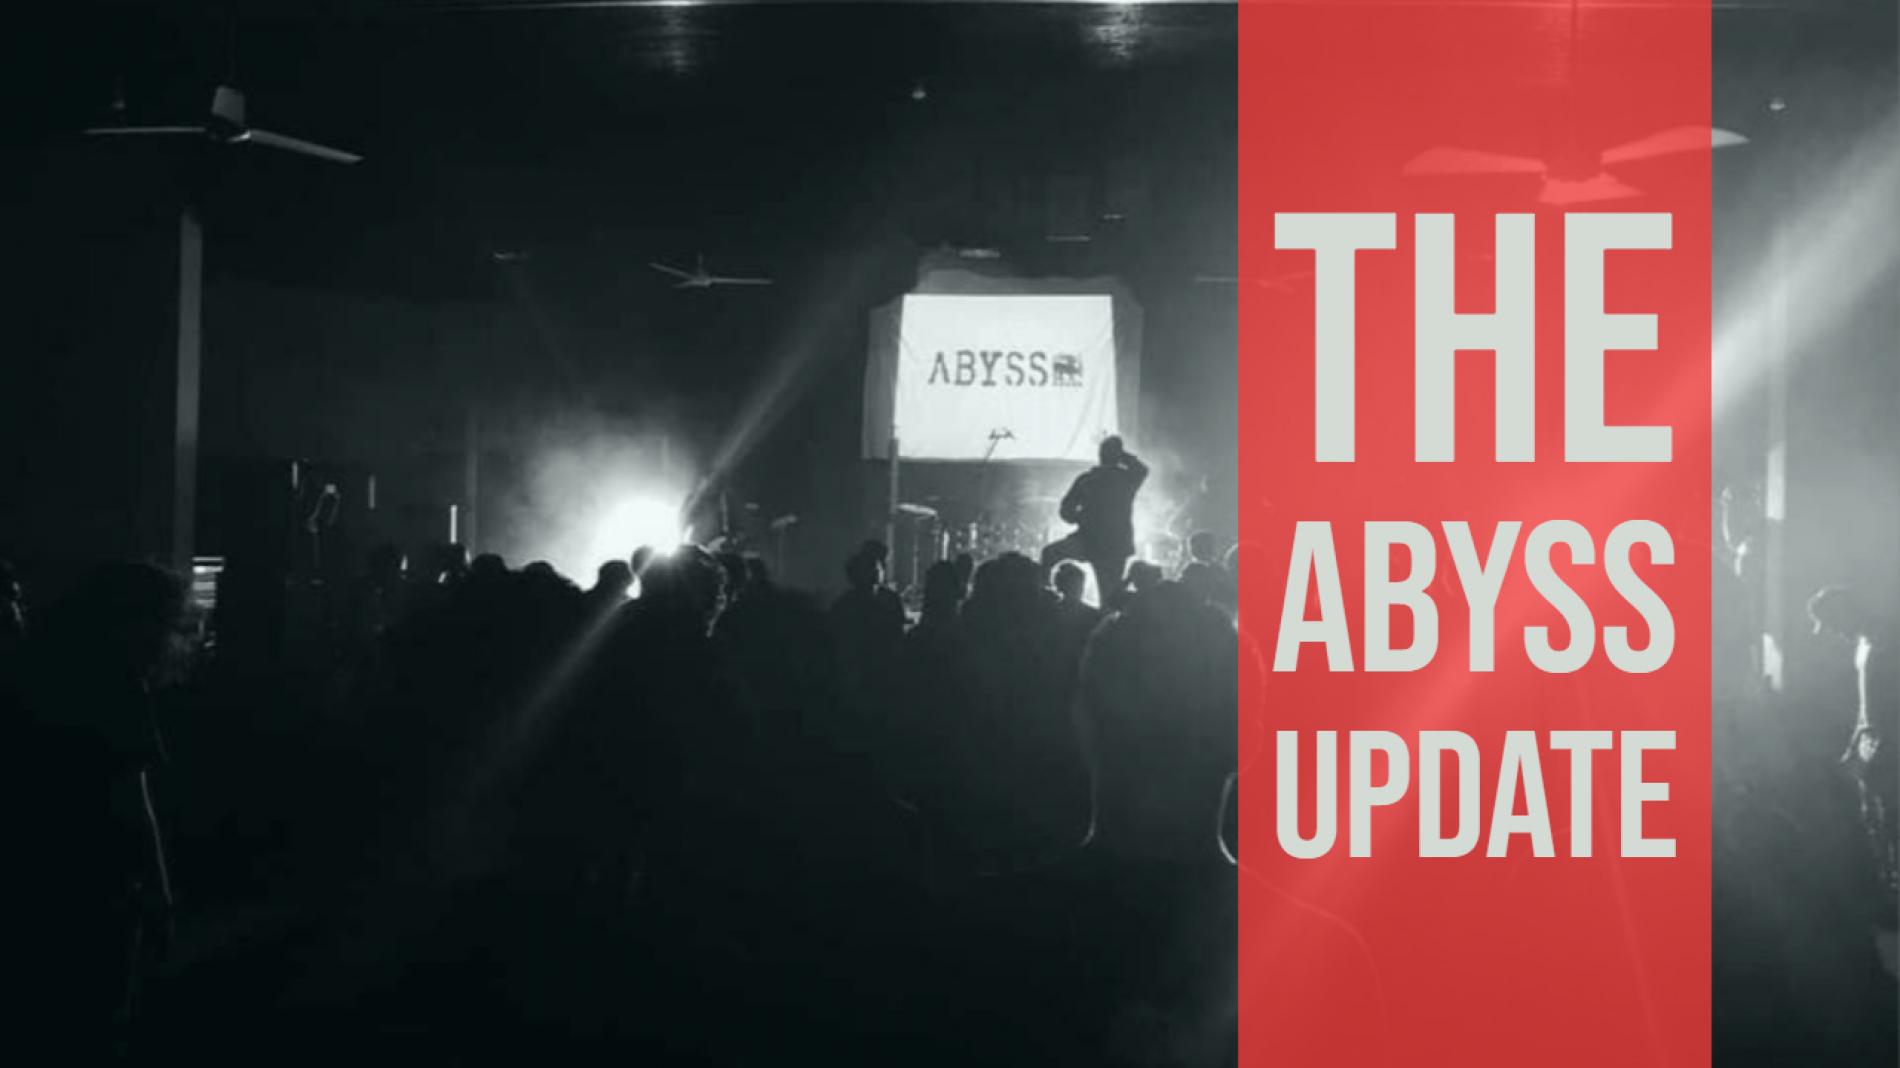 The Abyss Update